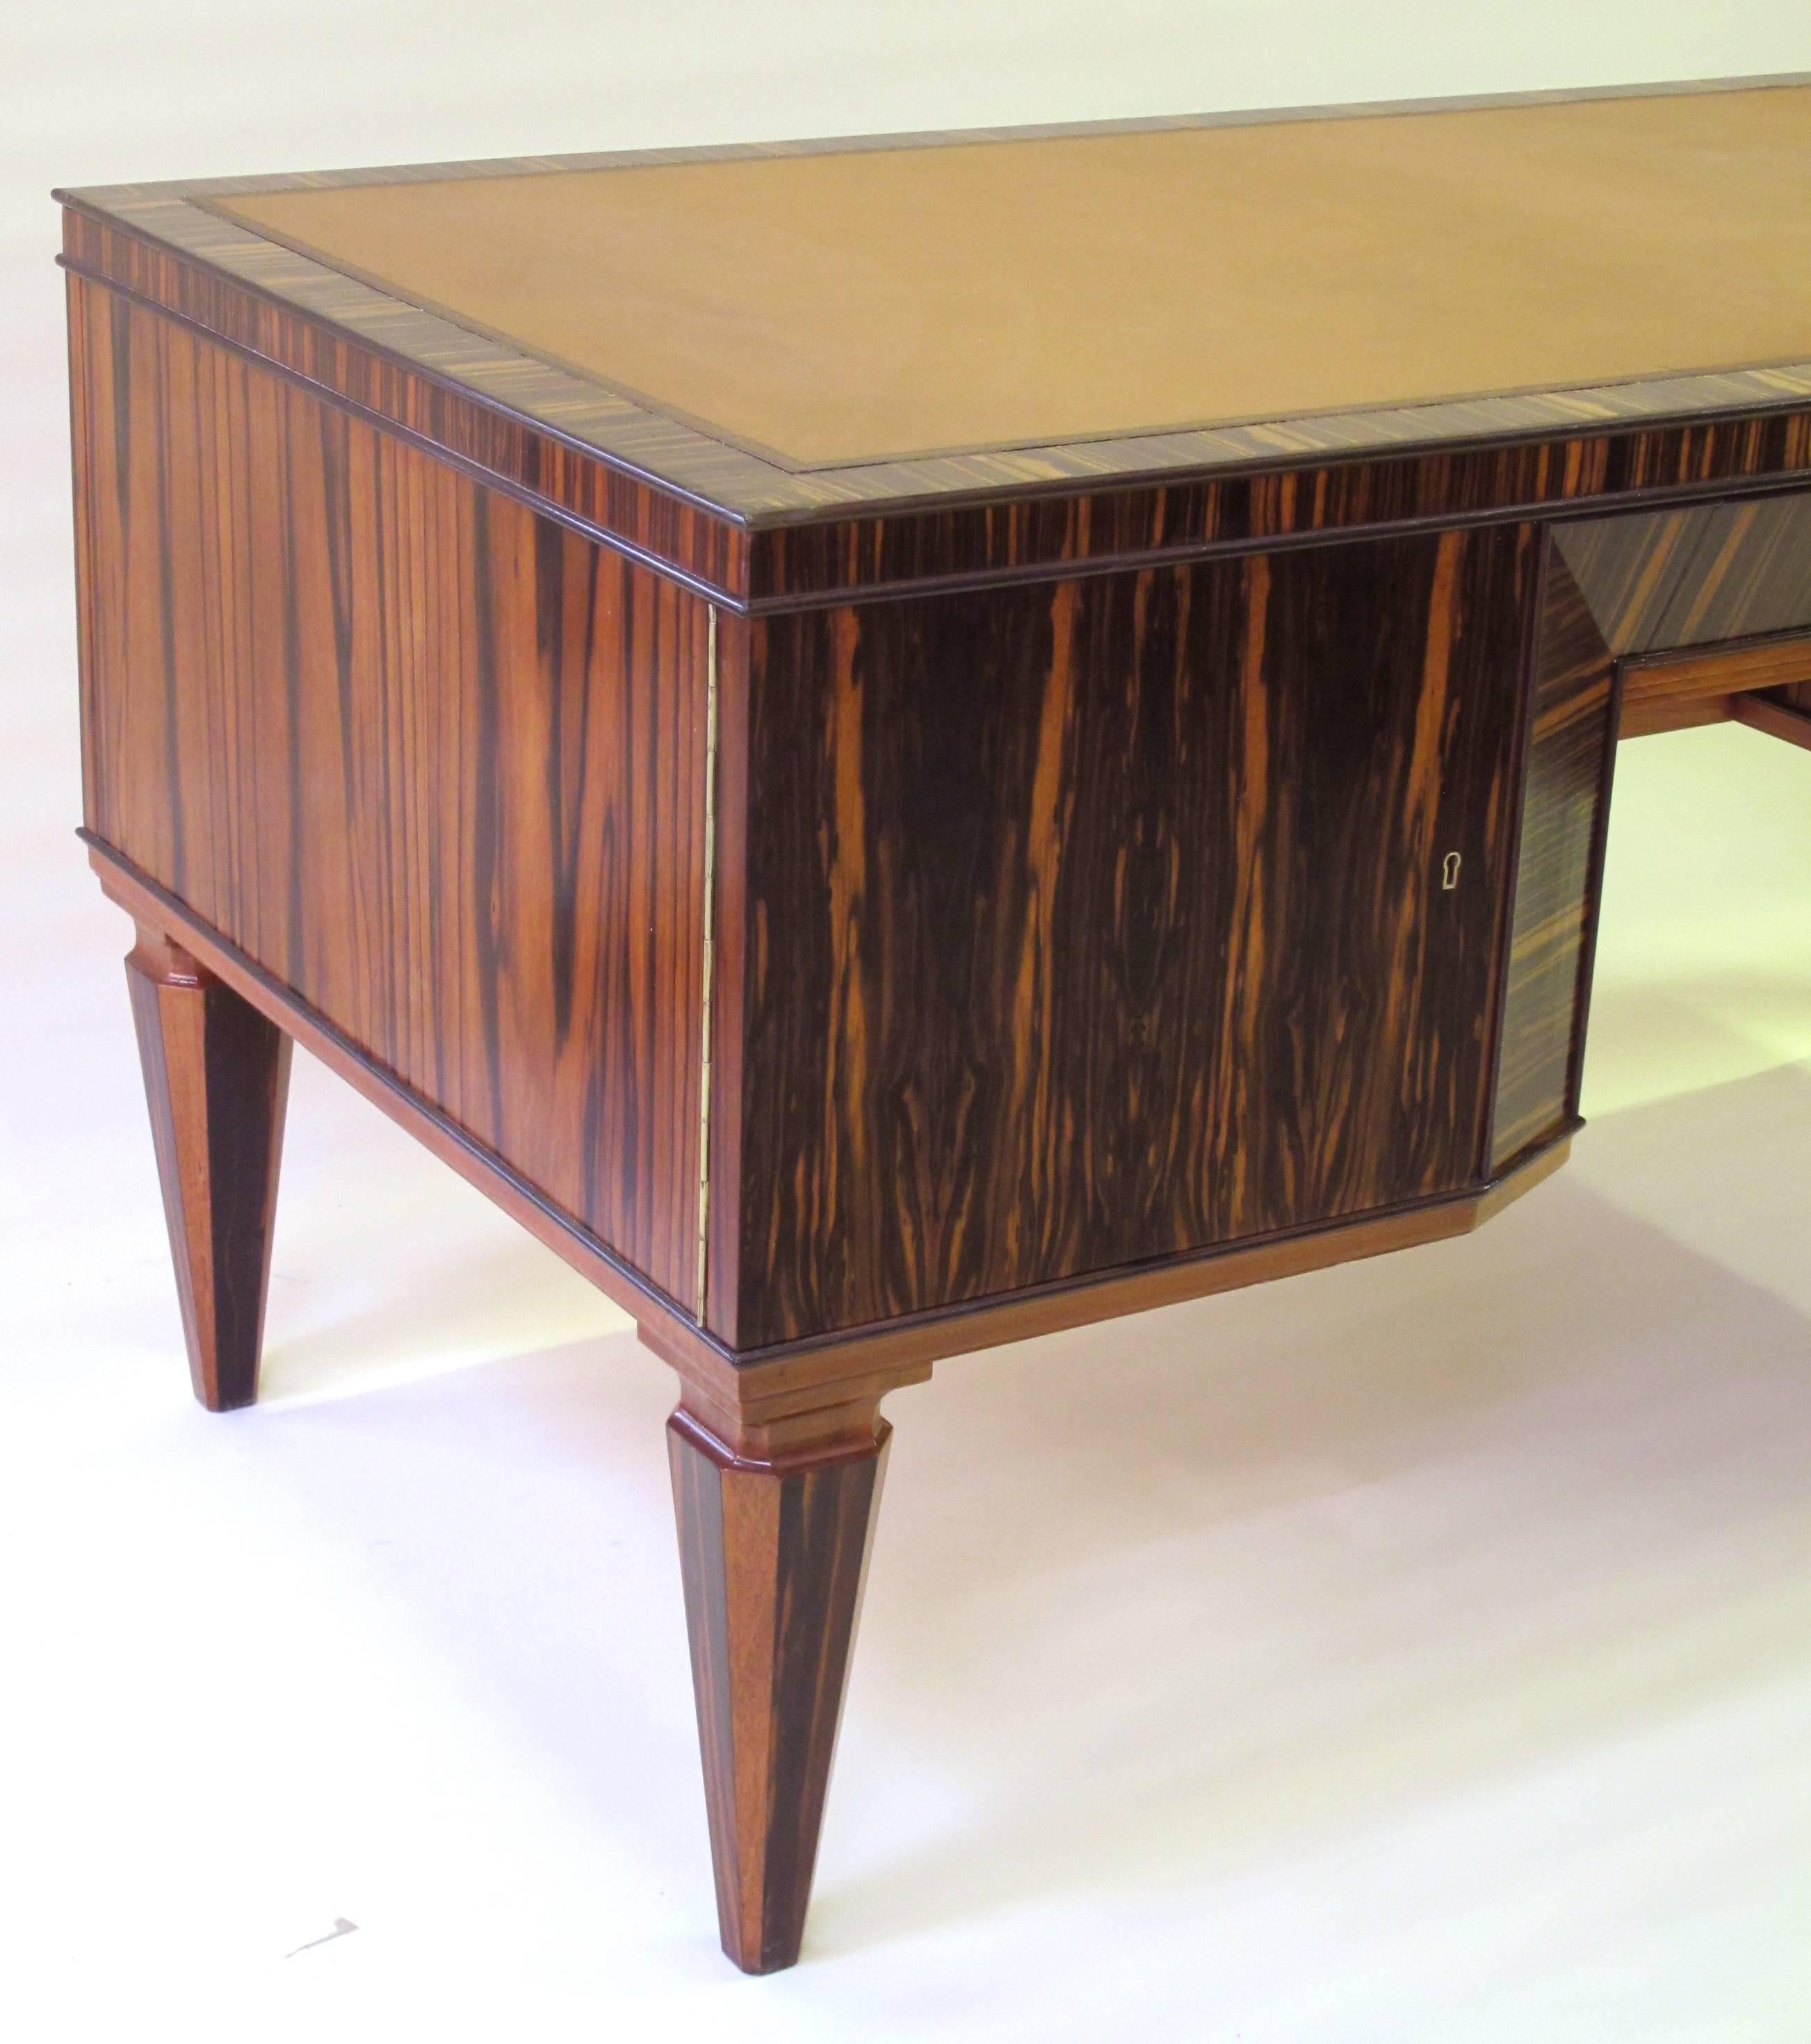 A handsome and boldly-scaled French Art Deco Macassar-veneered pedestal desk; the robustly-proportioned desk with inset hand-tooled leather top above a central drawer flanked by pedestal doors; raised on tapering block supports; new leather top.